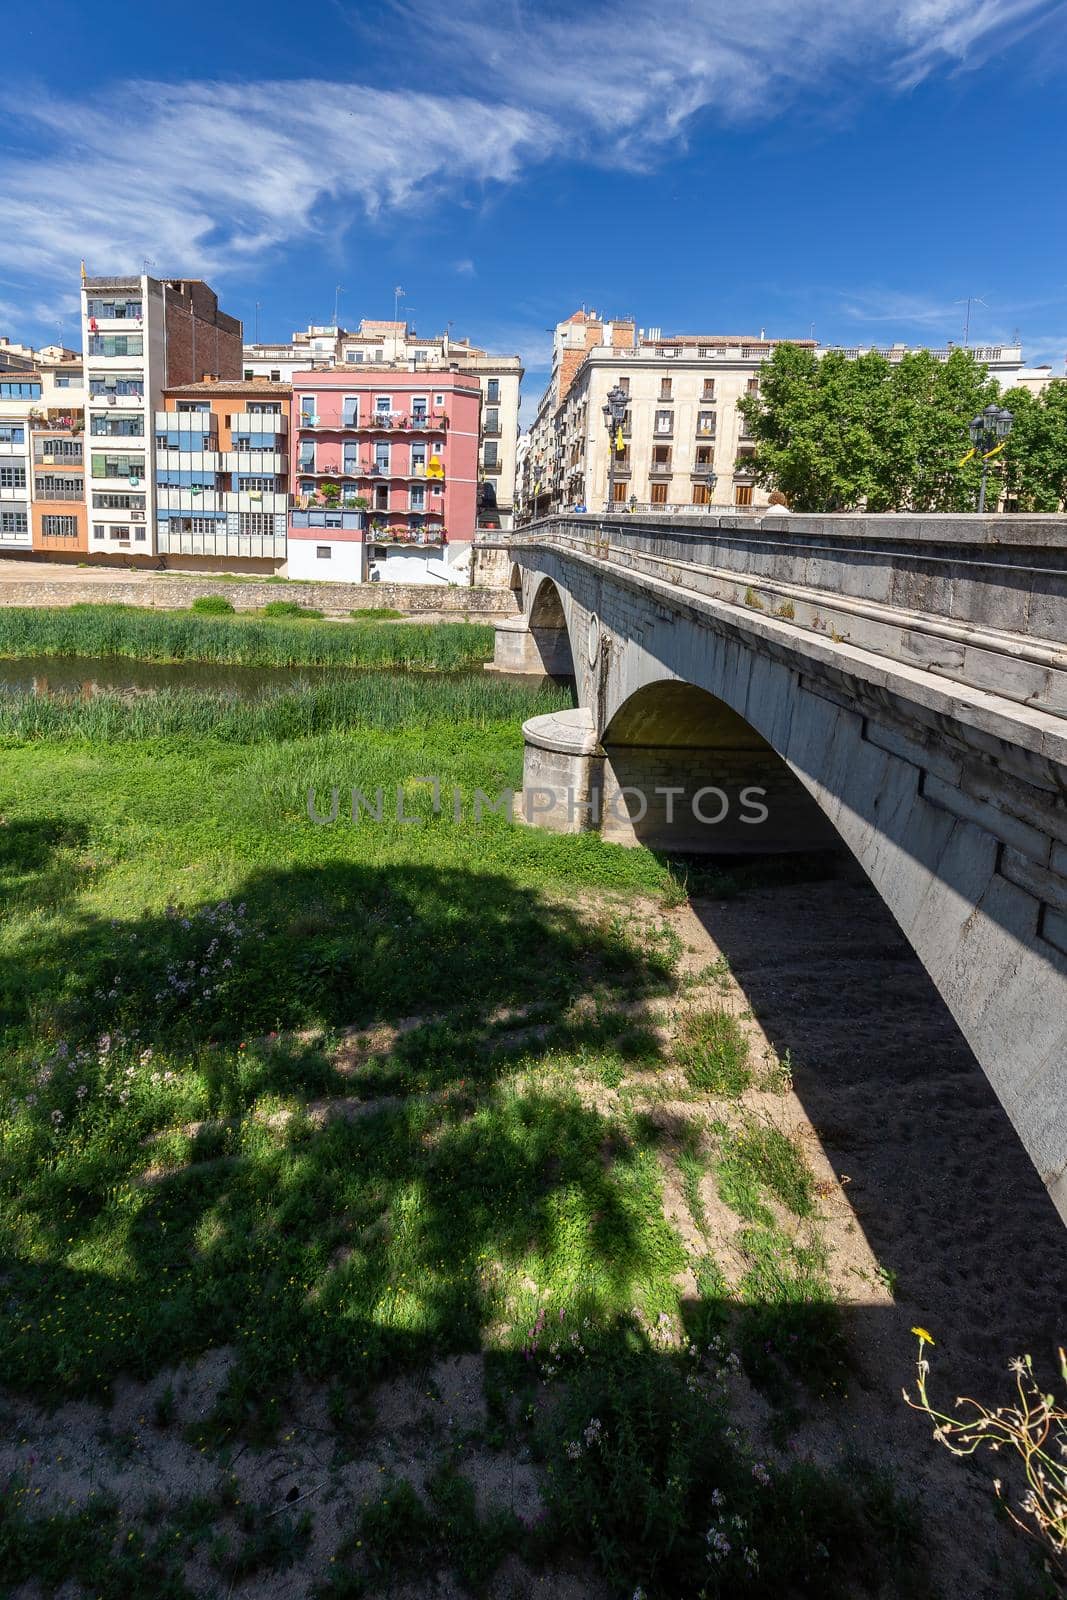 View of the embankment in Girona - Catalonia, Spain by Digoarpi